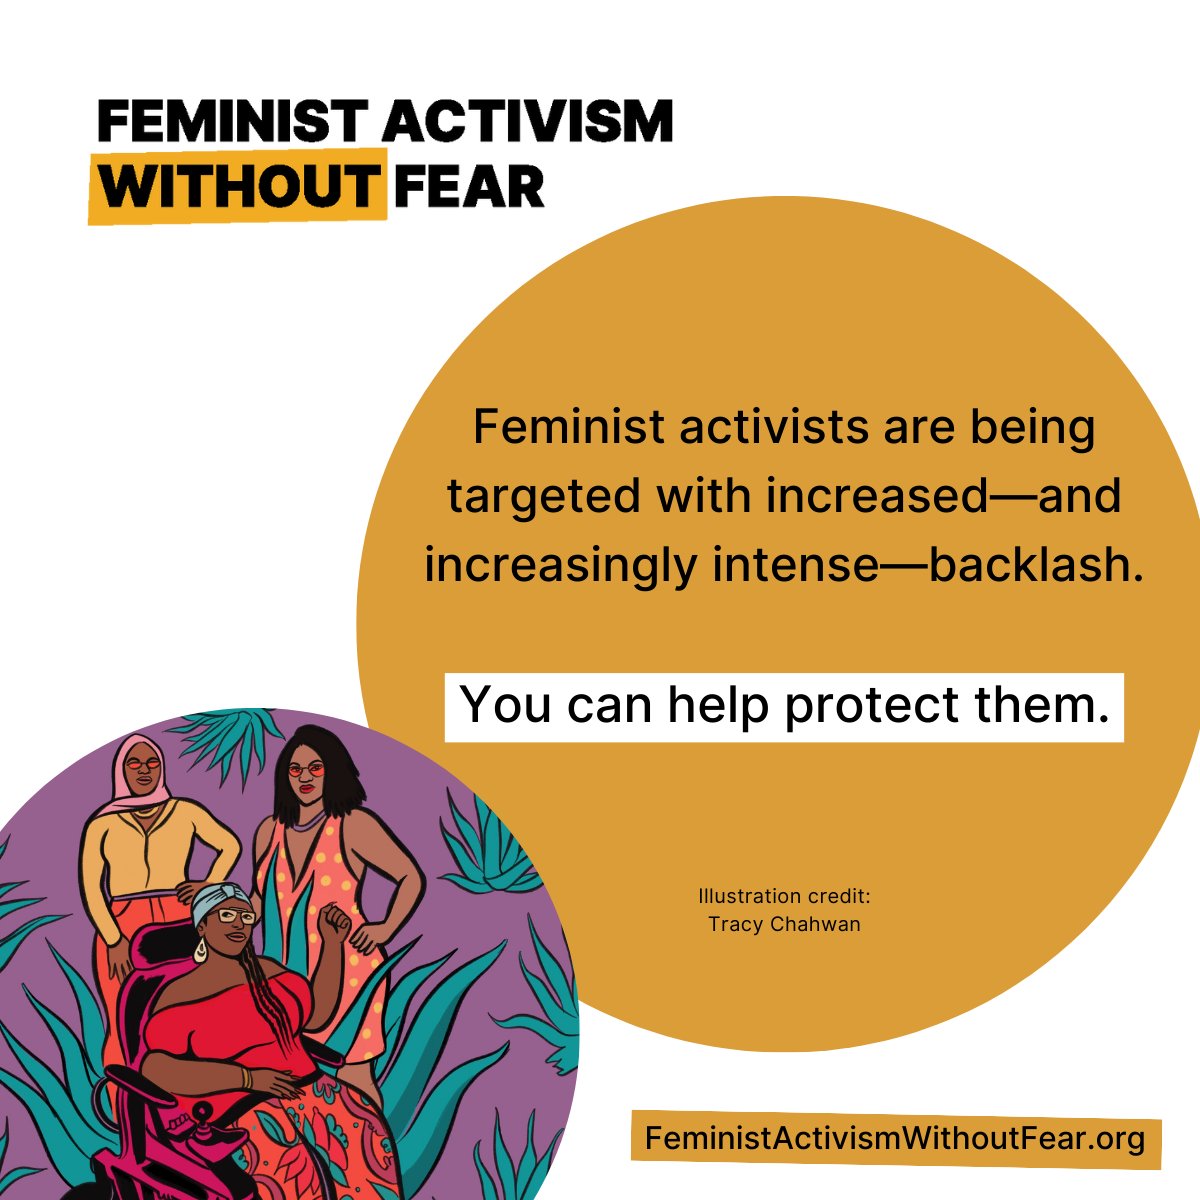 By shifting power, protection, and resources to frontline feminist movements, we can support activists in cultivating collective care to prevent, mitigate, and heal from reprisals and ensure movements thrive over time. Learn about the role you can take: FeministActivismWithoutFear.org